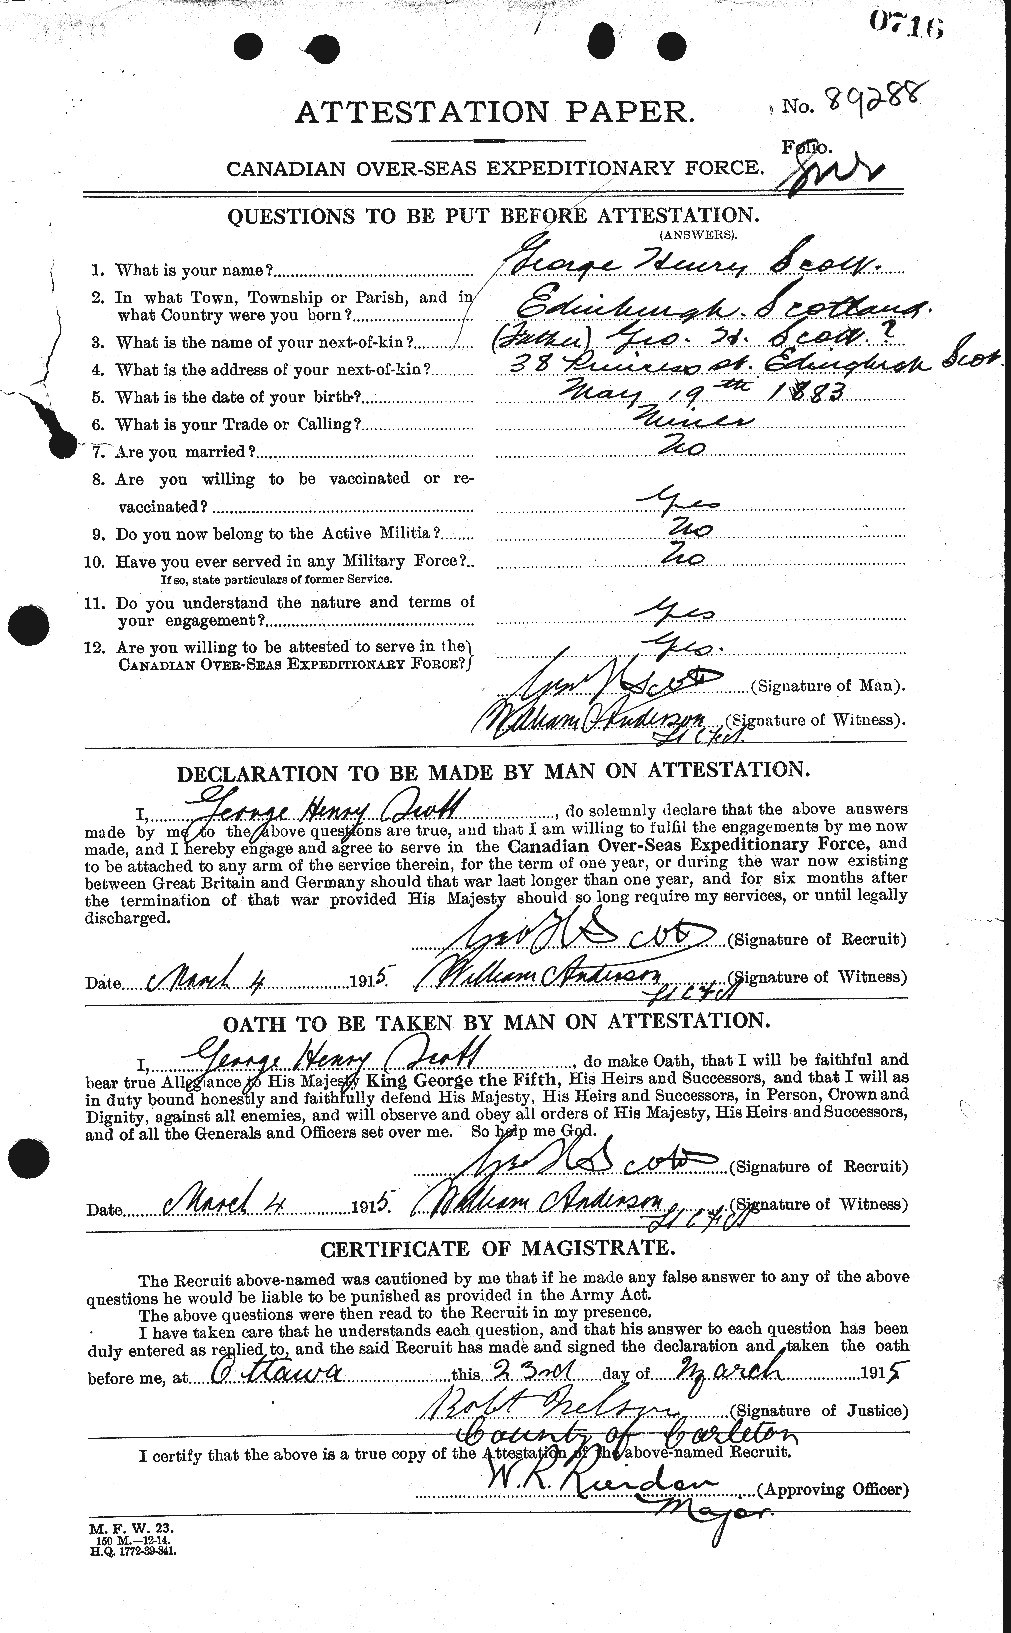 Personnel Records of the First World War - CEF 083551a